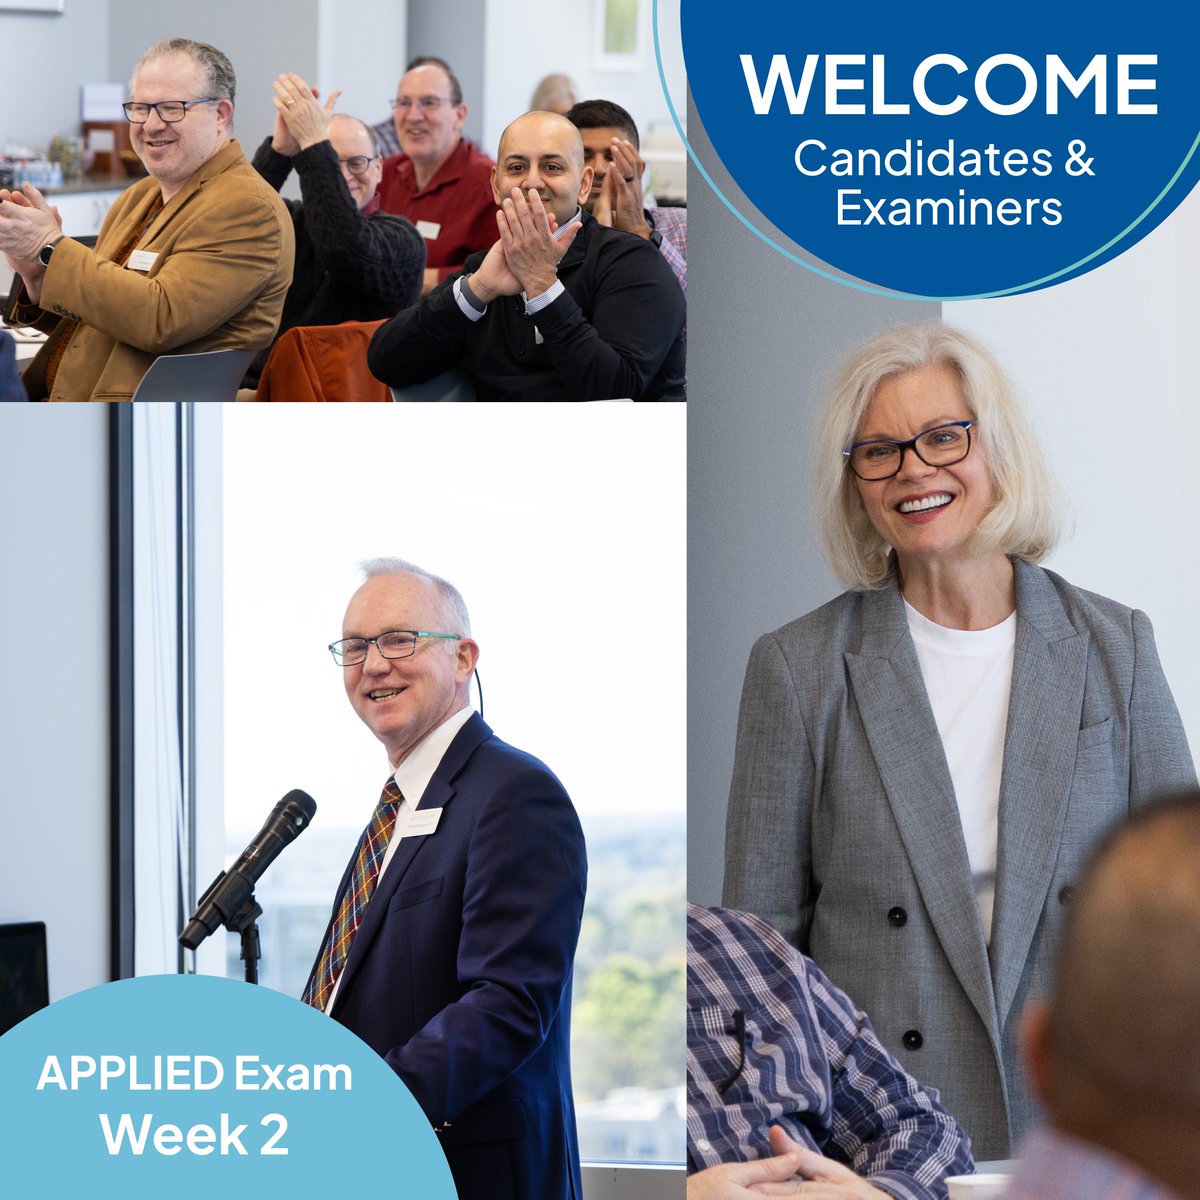 We are pleased to welcome all examiners and candidates participating in Week 2 of the APPLIED Exam to Raleigh, N.C. We are looking forward to another successful week of assessments at the AIME Center. #anesthesiology #theABA #BoardCertification #APPLIEDExam